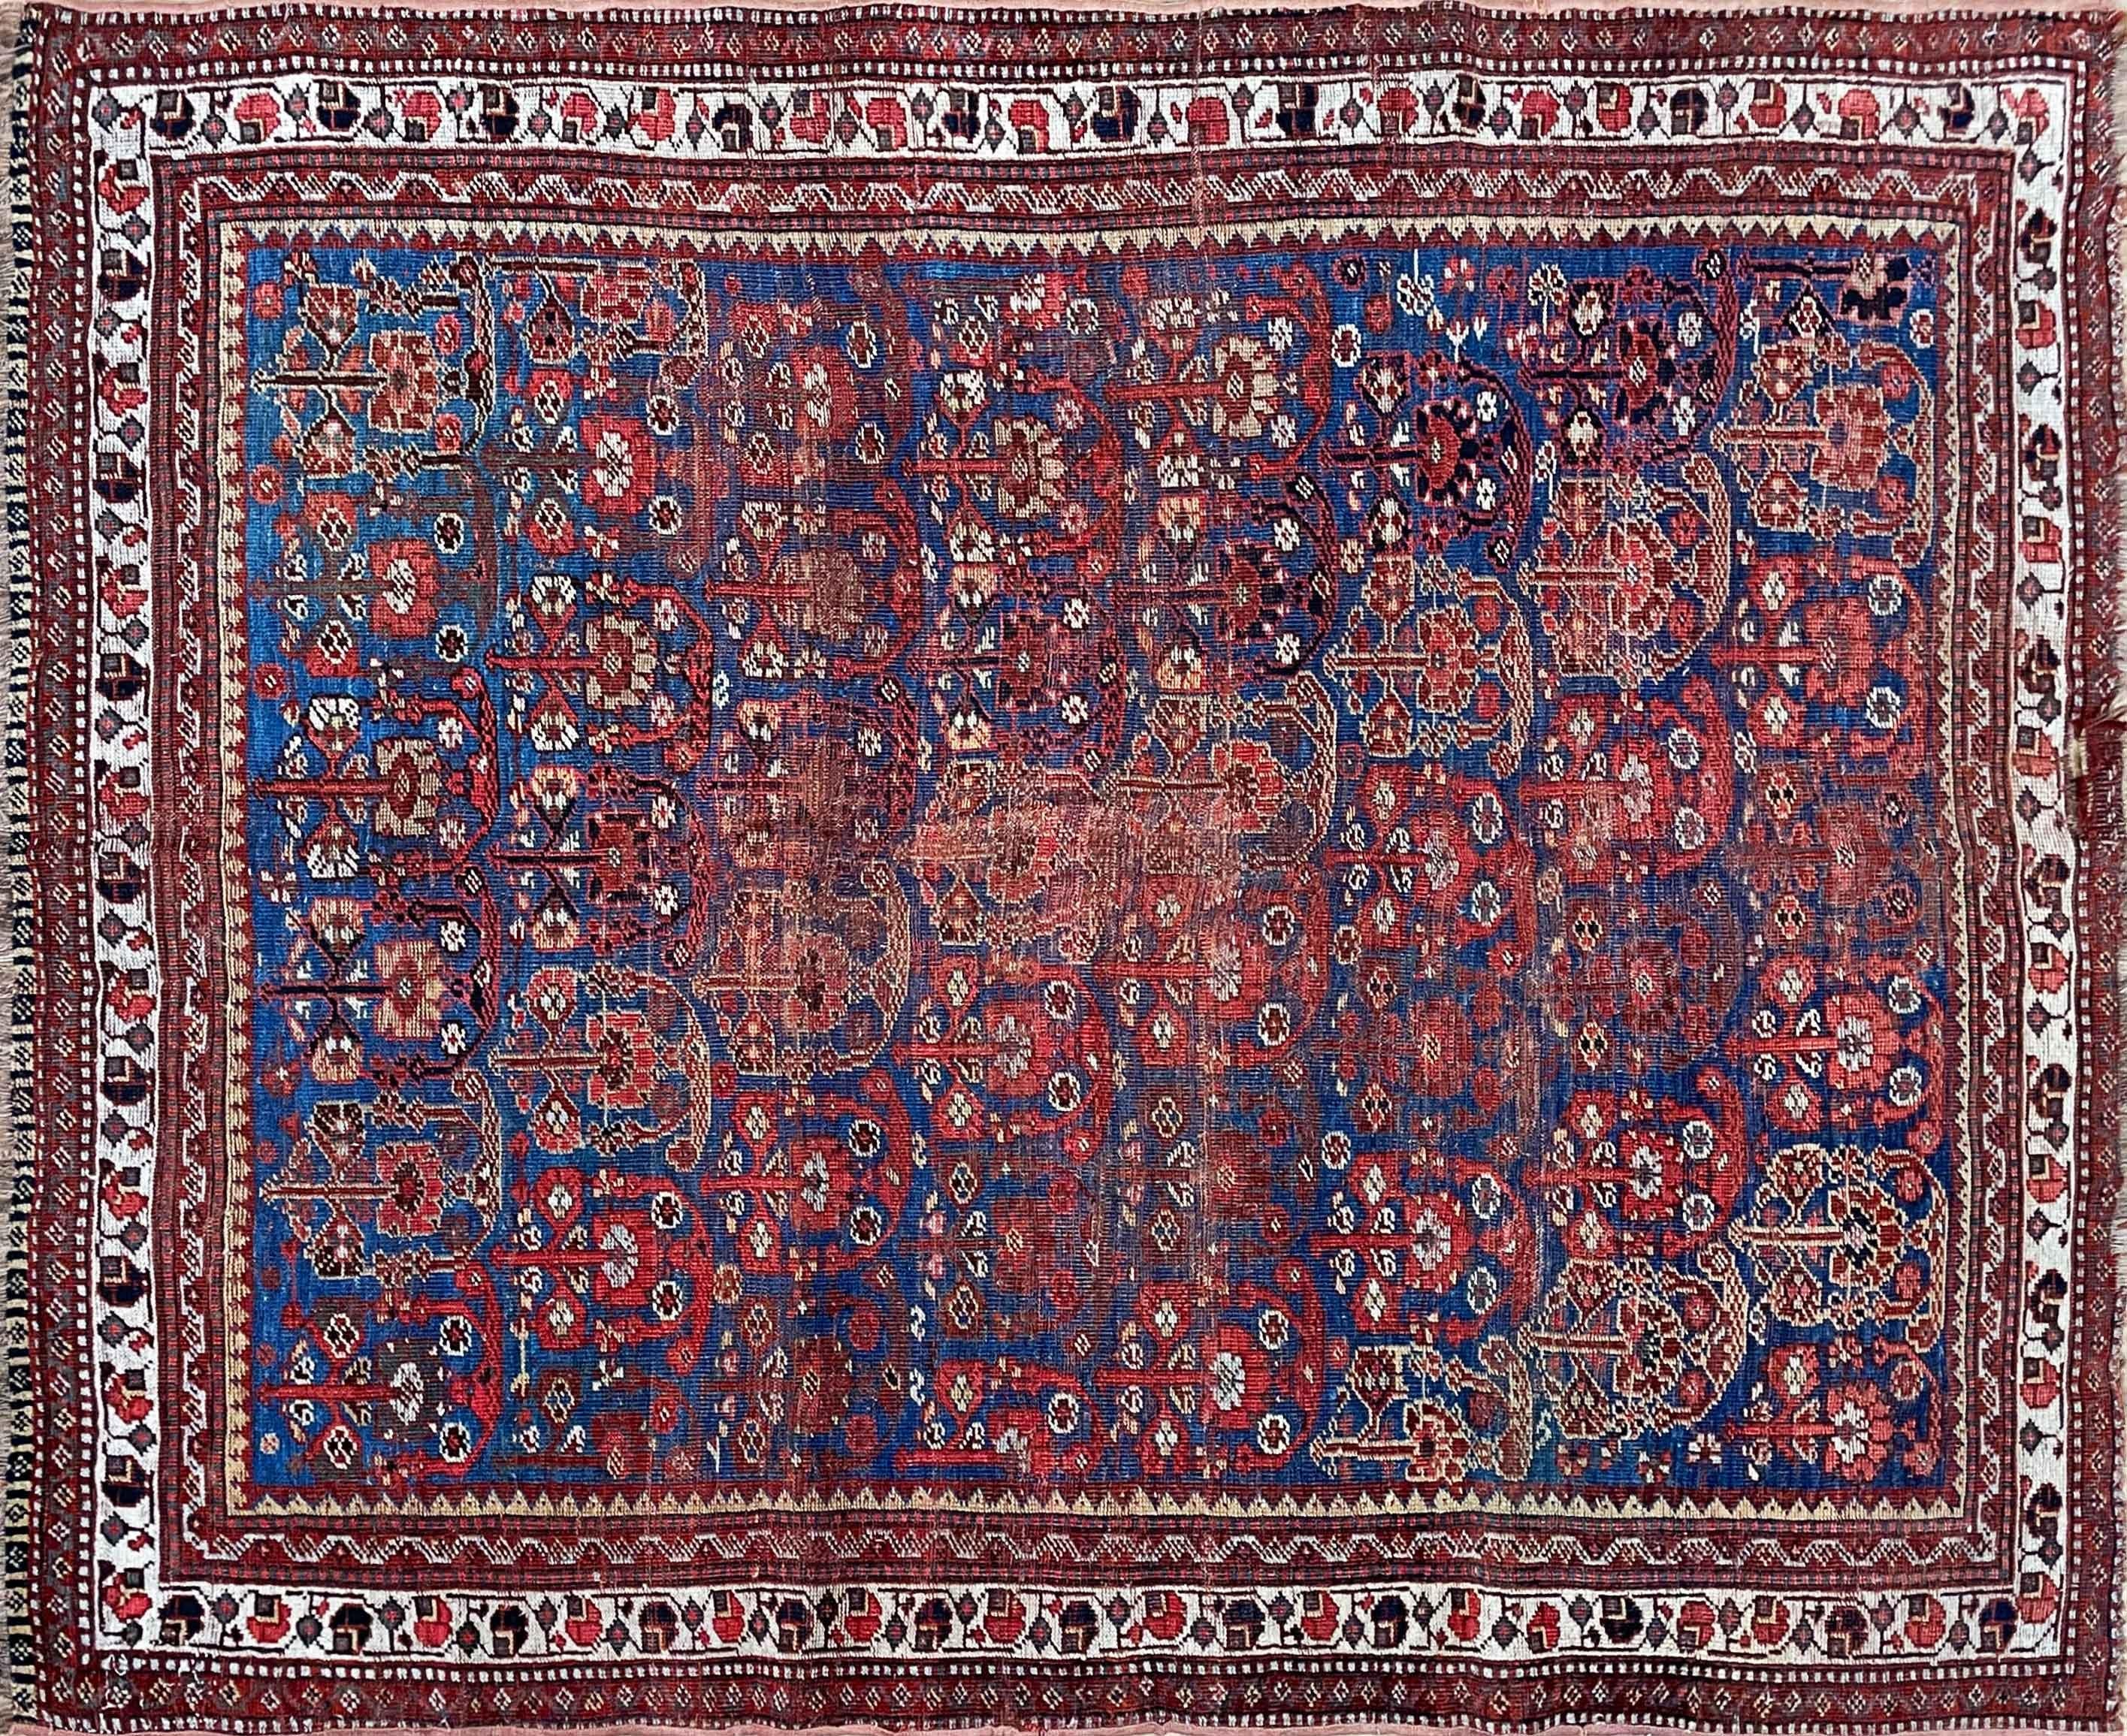 Exquisite Antique Persian Qashqai Rug - A True Masterpiece

Transport yourself to the rich heritage of Persian craftsmanship with this remarkable Antique Qashqai Rug, dating back to the 1870s and measuring 4'5